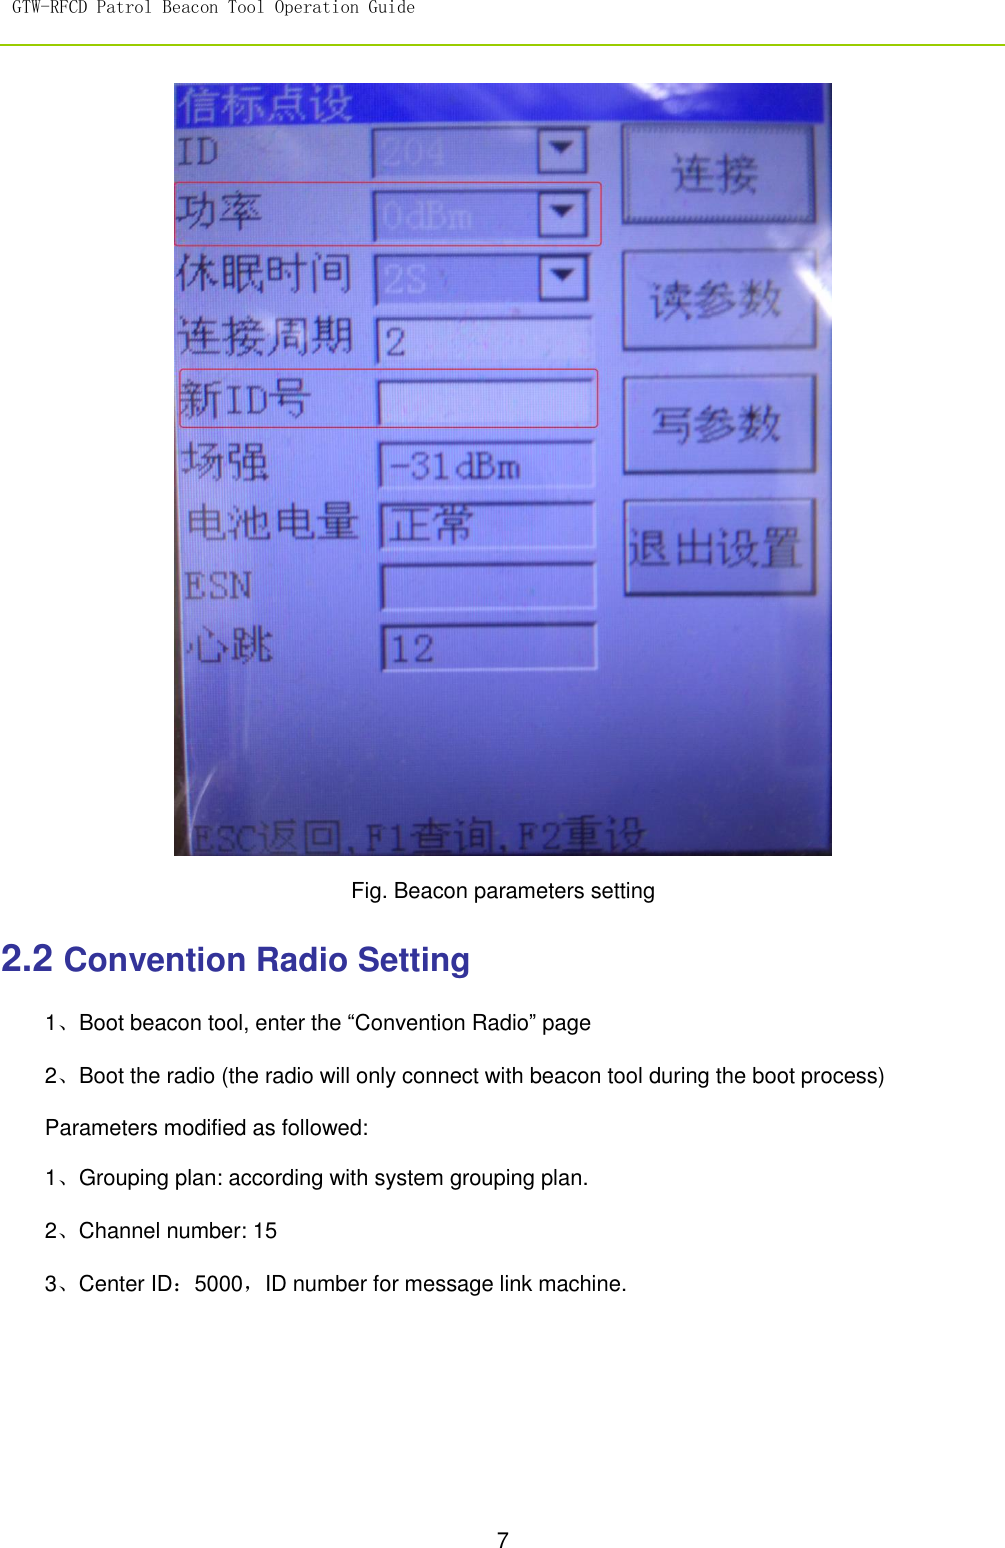 GTW-RFCD Patrol Beacon Tool Operation Guide   7   Fig. Beacon parameters setting 2.2 Convention Radio Setting 1、Boot beacon tool, enter the “Convention Radio” page 2、Boot the radio (the radio will only connect with beacon tool during the boot process)   Parameters modified as followed: 1、Grouping plan: according with system grouping plan. 2、Channel number: 15   3、Center ID：5000，ID number for message link machine. 